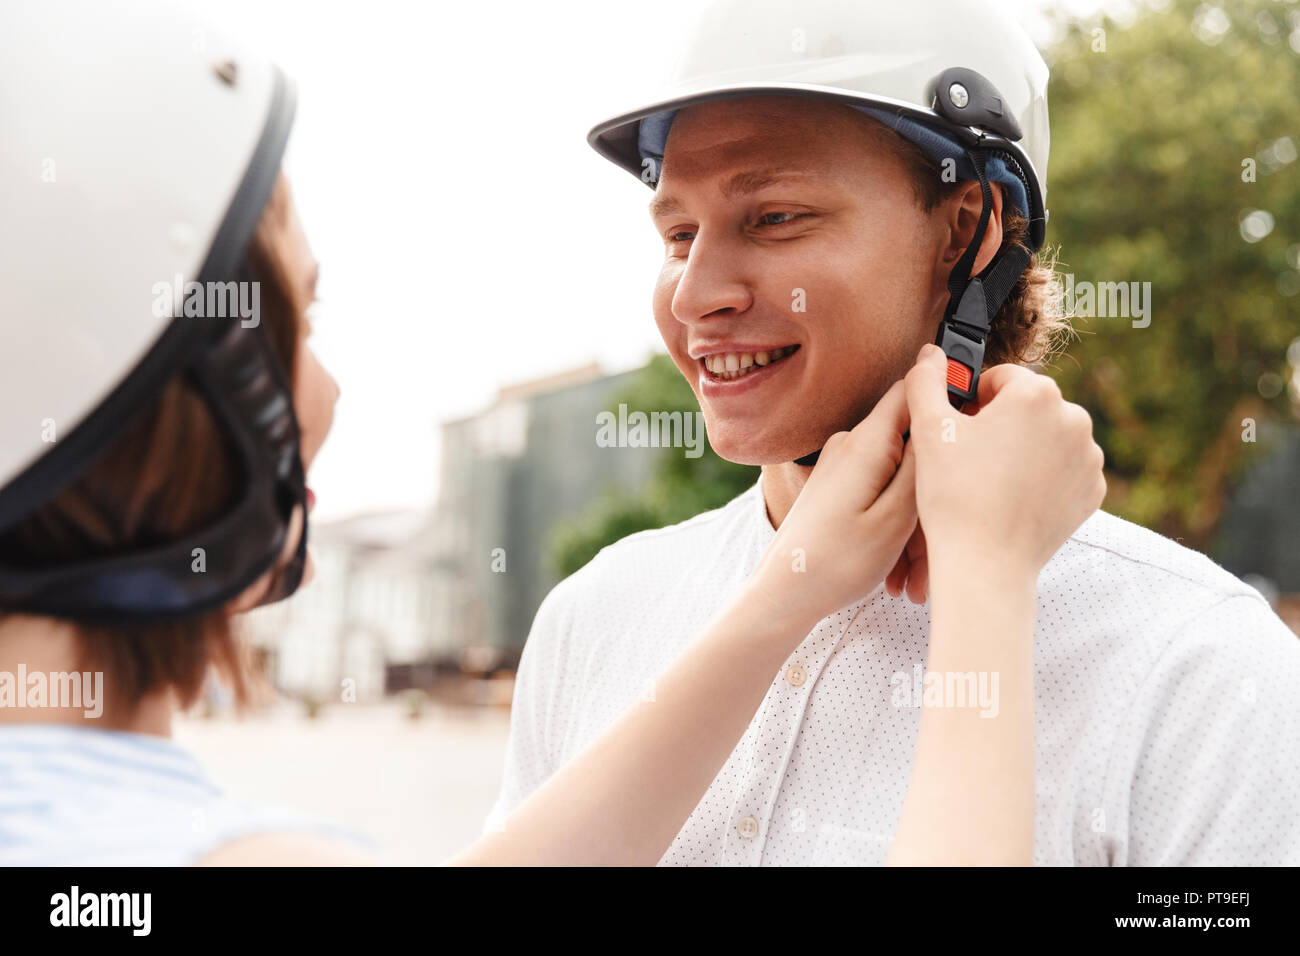 Cropped view of happy woman fastens a helmet to her boyfriend outdoors Stock Photo